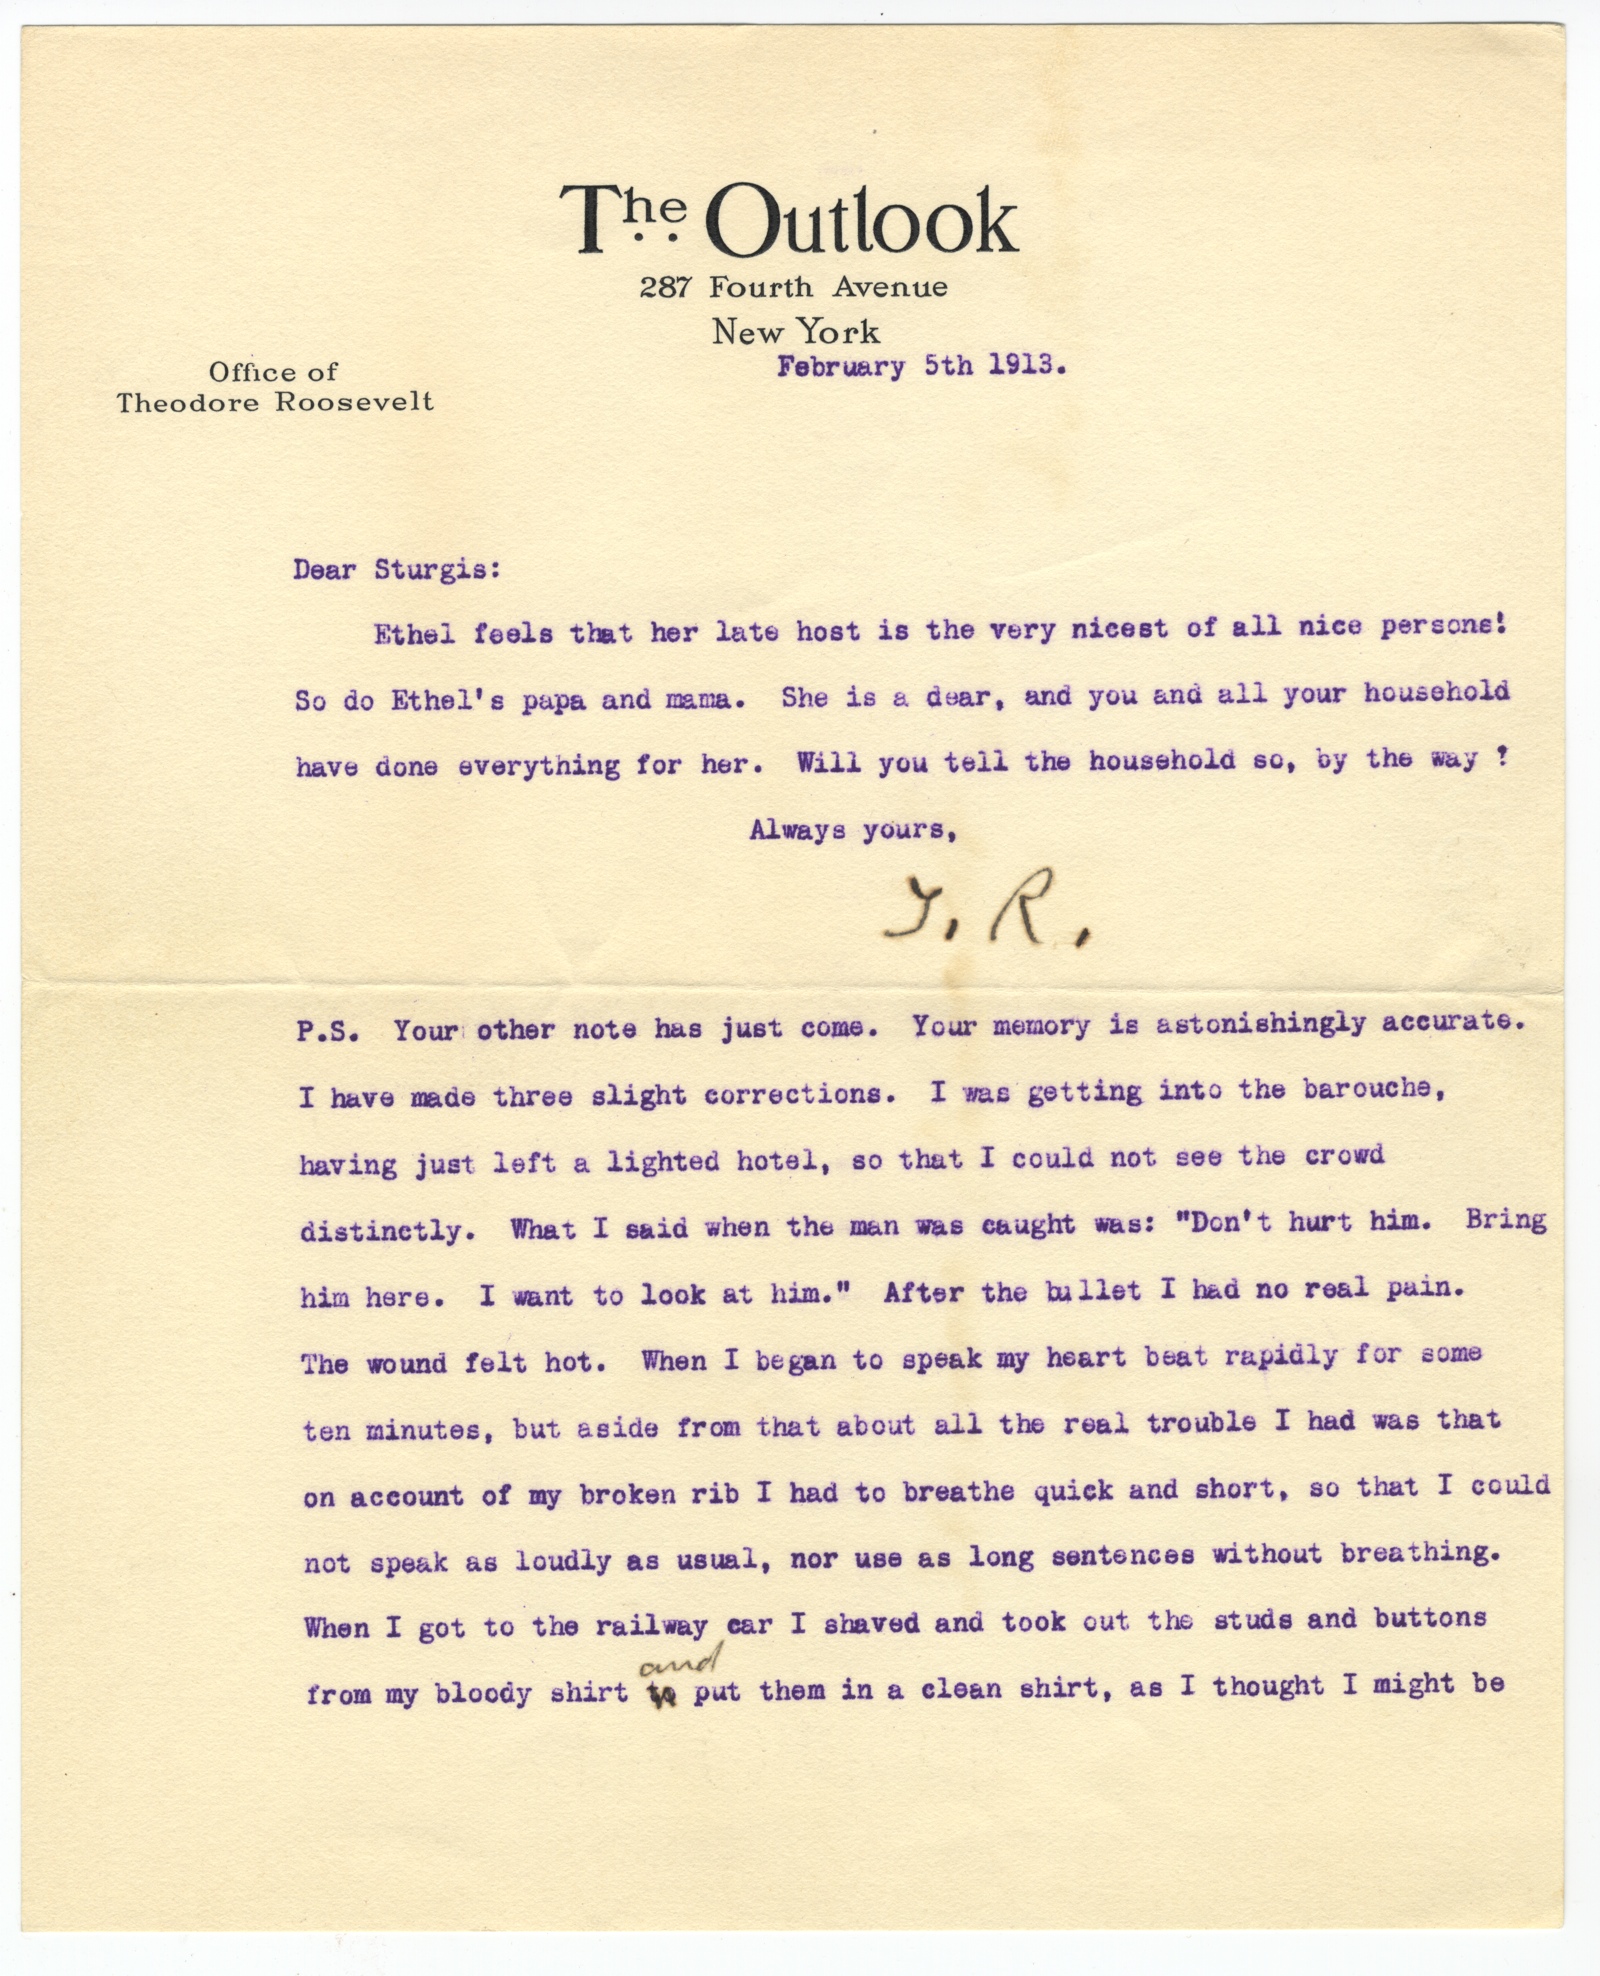 Theodore Roosevelt Comments On, and Then Annotates, a Manuscript Detailing the Attempt Made on His Life